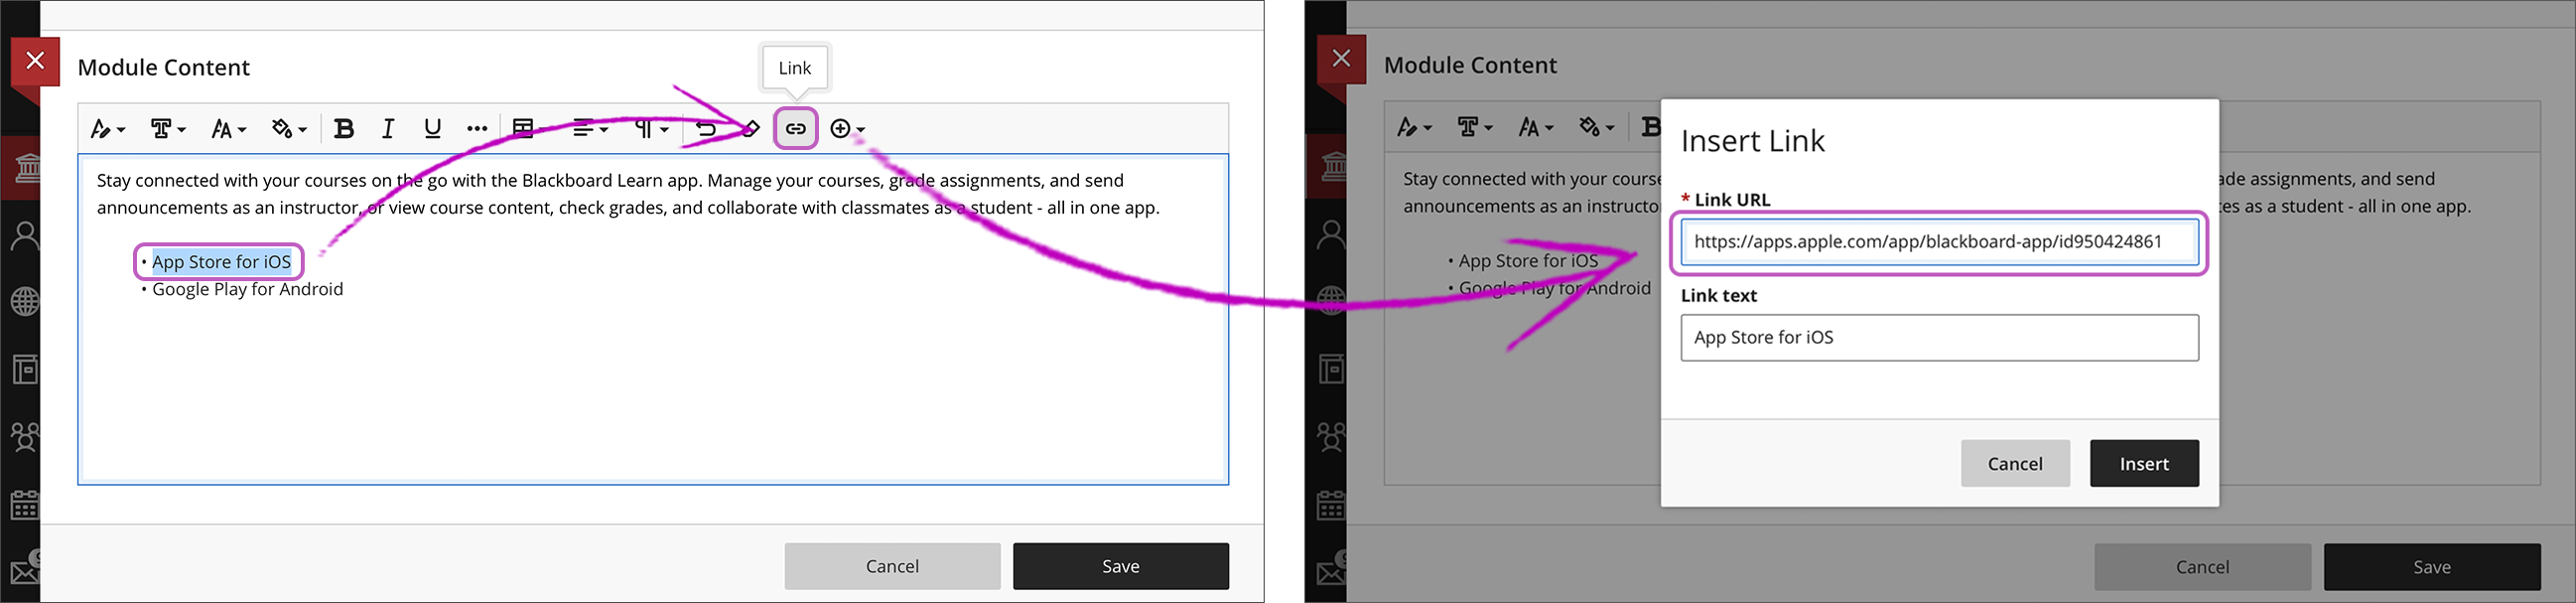 The "Module Content" editor is displayed with 1) the "App Store for iOS" text highlighted, 2) the "Link" button selected and highlighted, 3) the "Insert/Edit Link" window opened, 4) and the "Link URL" space filled in and highlighted.